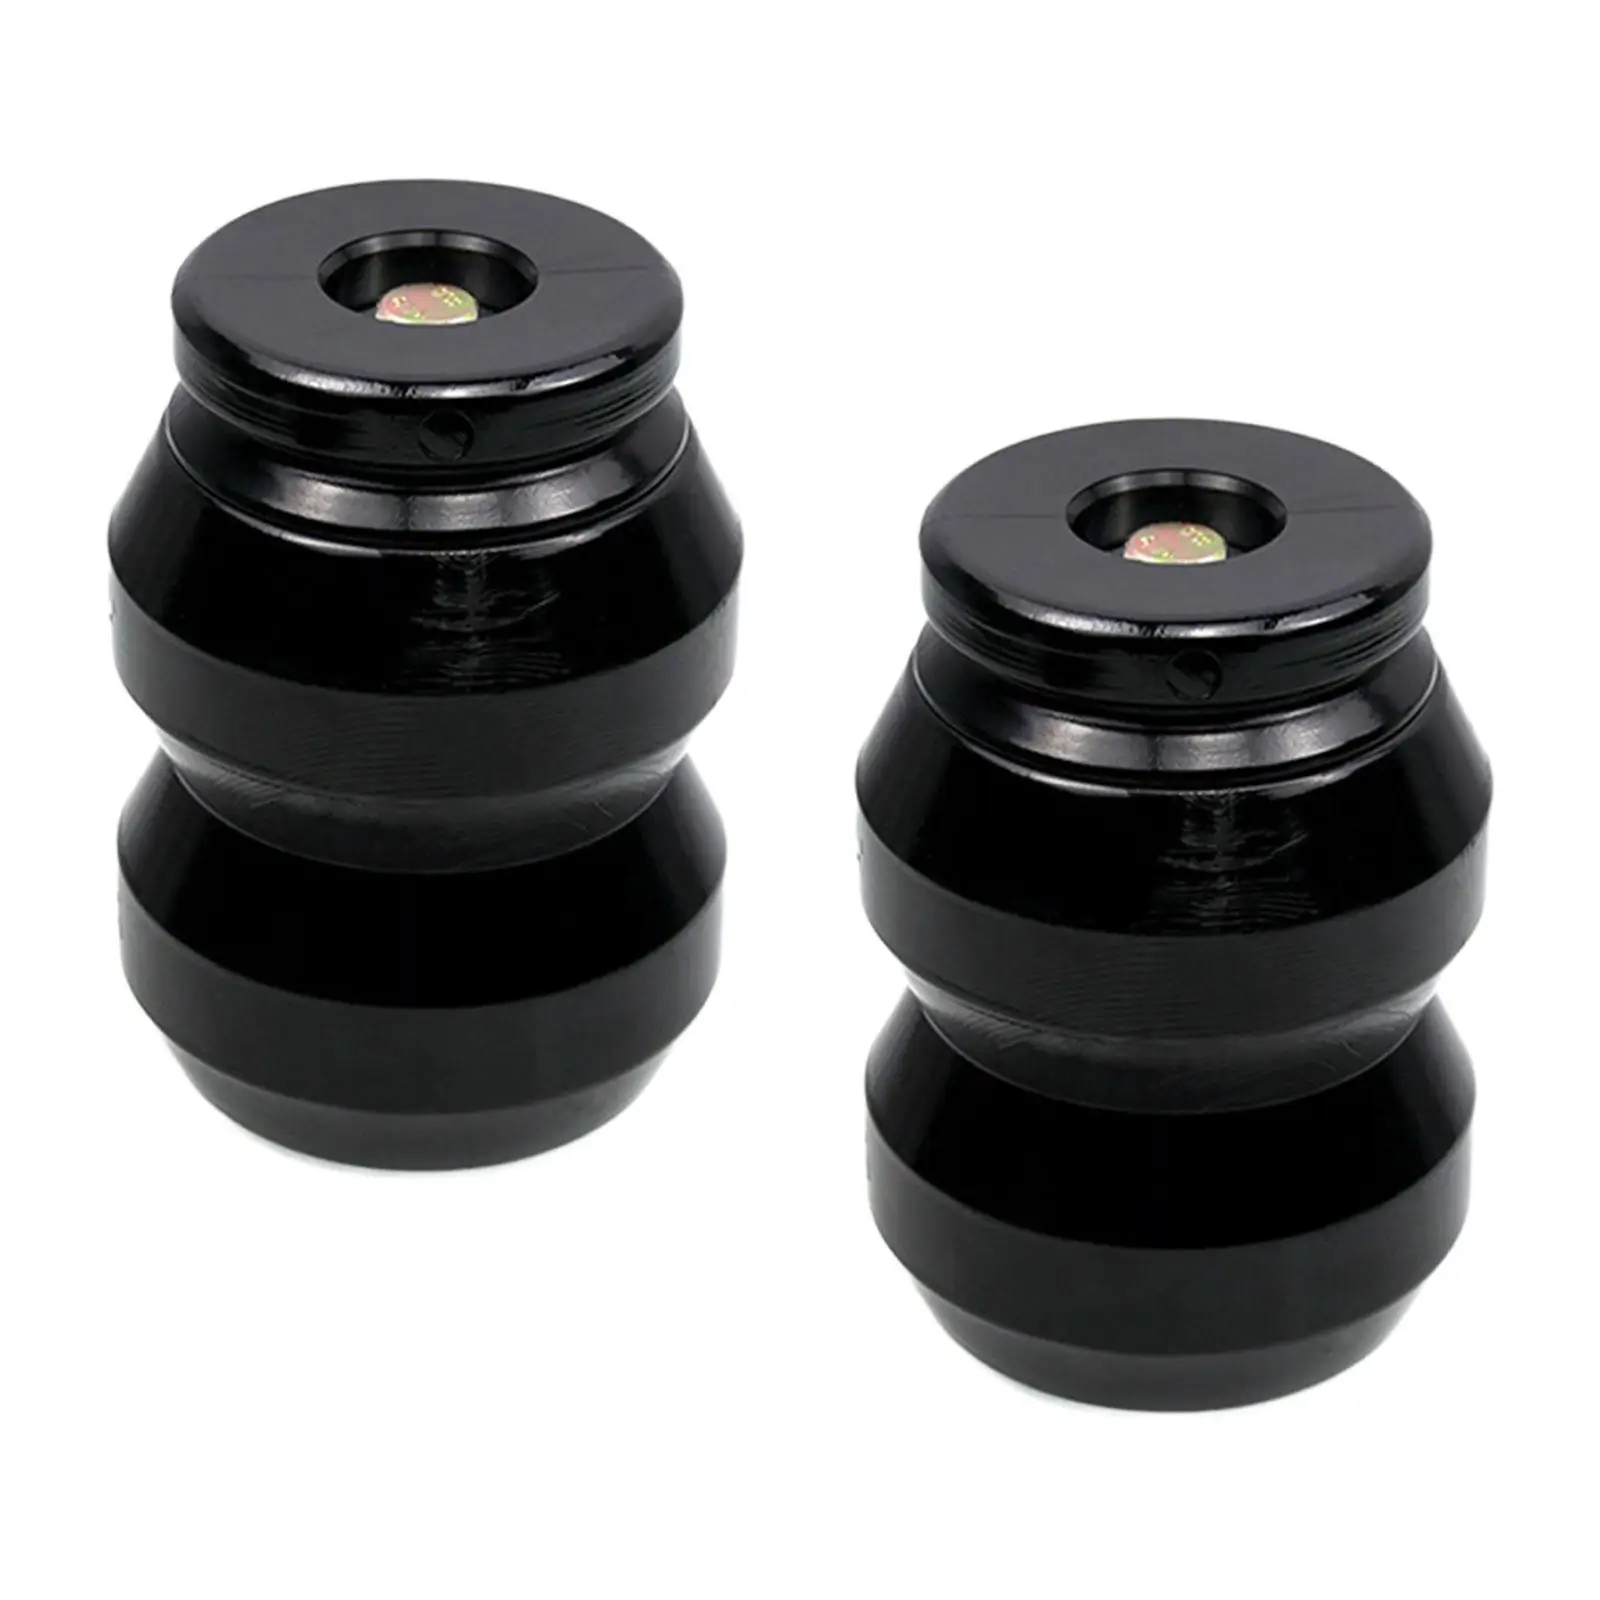 2Pcs Suspension Enhancement System Durable Replace DR1500DQ Easy to Install for 1500 2WD 4WD